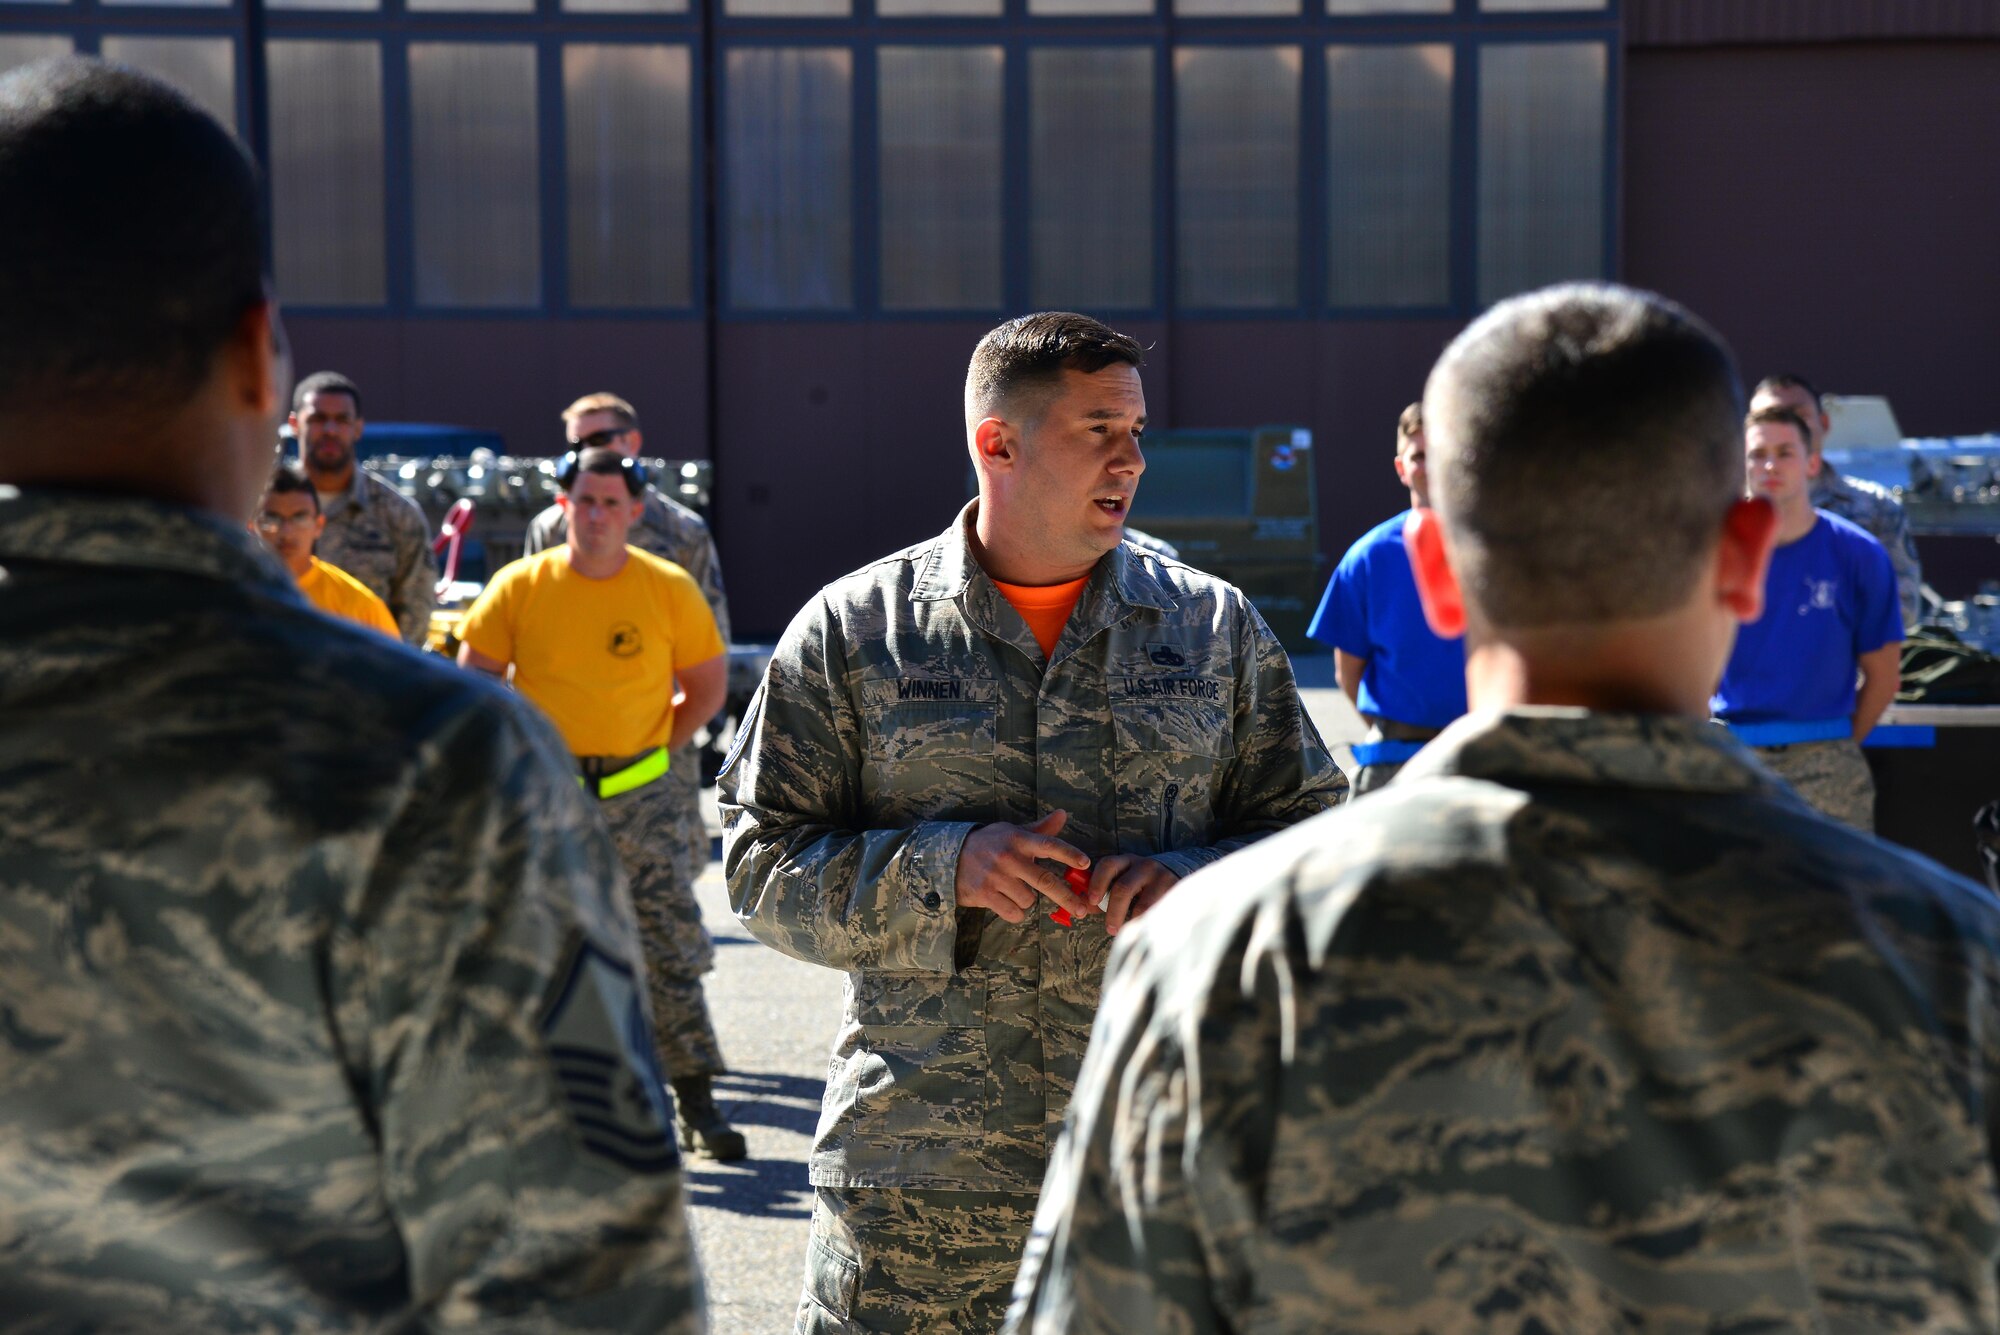 U.S. Air Force Master Sgt. Theodore Winnen, 1st Maintenance Group weapons standardization superintendent, welcomes the audience to the 1st Maintenance Squadron Weapons Load Crew of the Quarter competition at Joint Base Langley-Eustis, Va., Oct. 28, 2016. The competition is held every quarter and allows the load crews from each aircraft maintenance unit to showcase their skills and abilities while loading the aircraft with munitions. (U.S. Air Force photo by Airman 1st Class Tristan Biese)